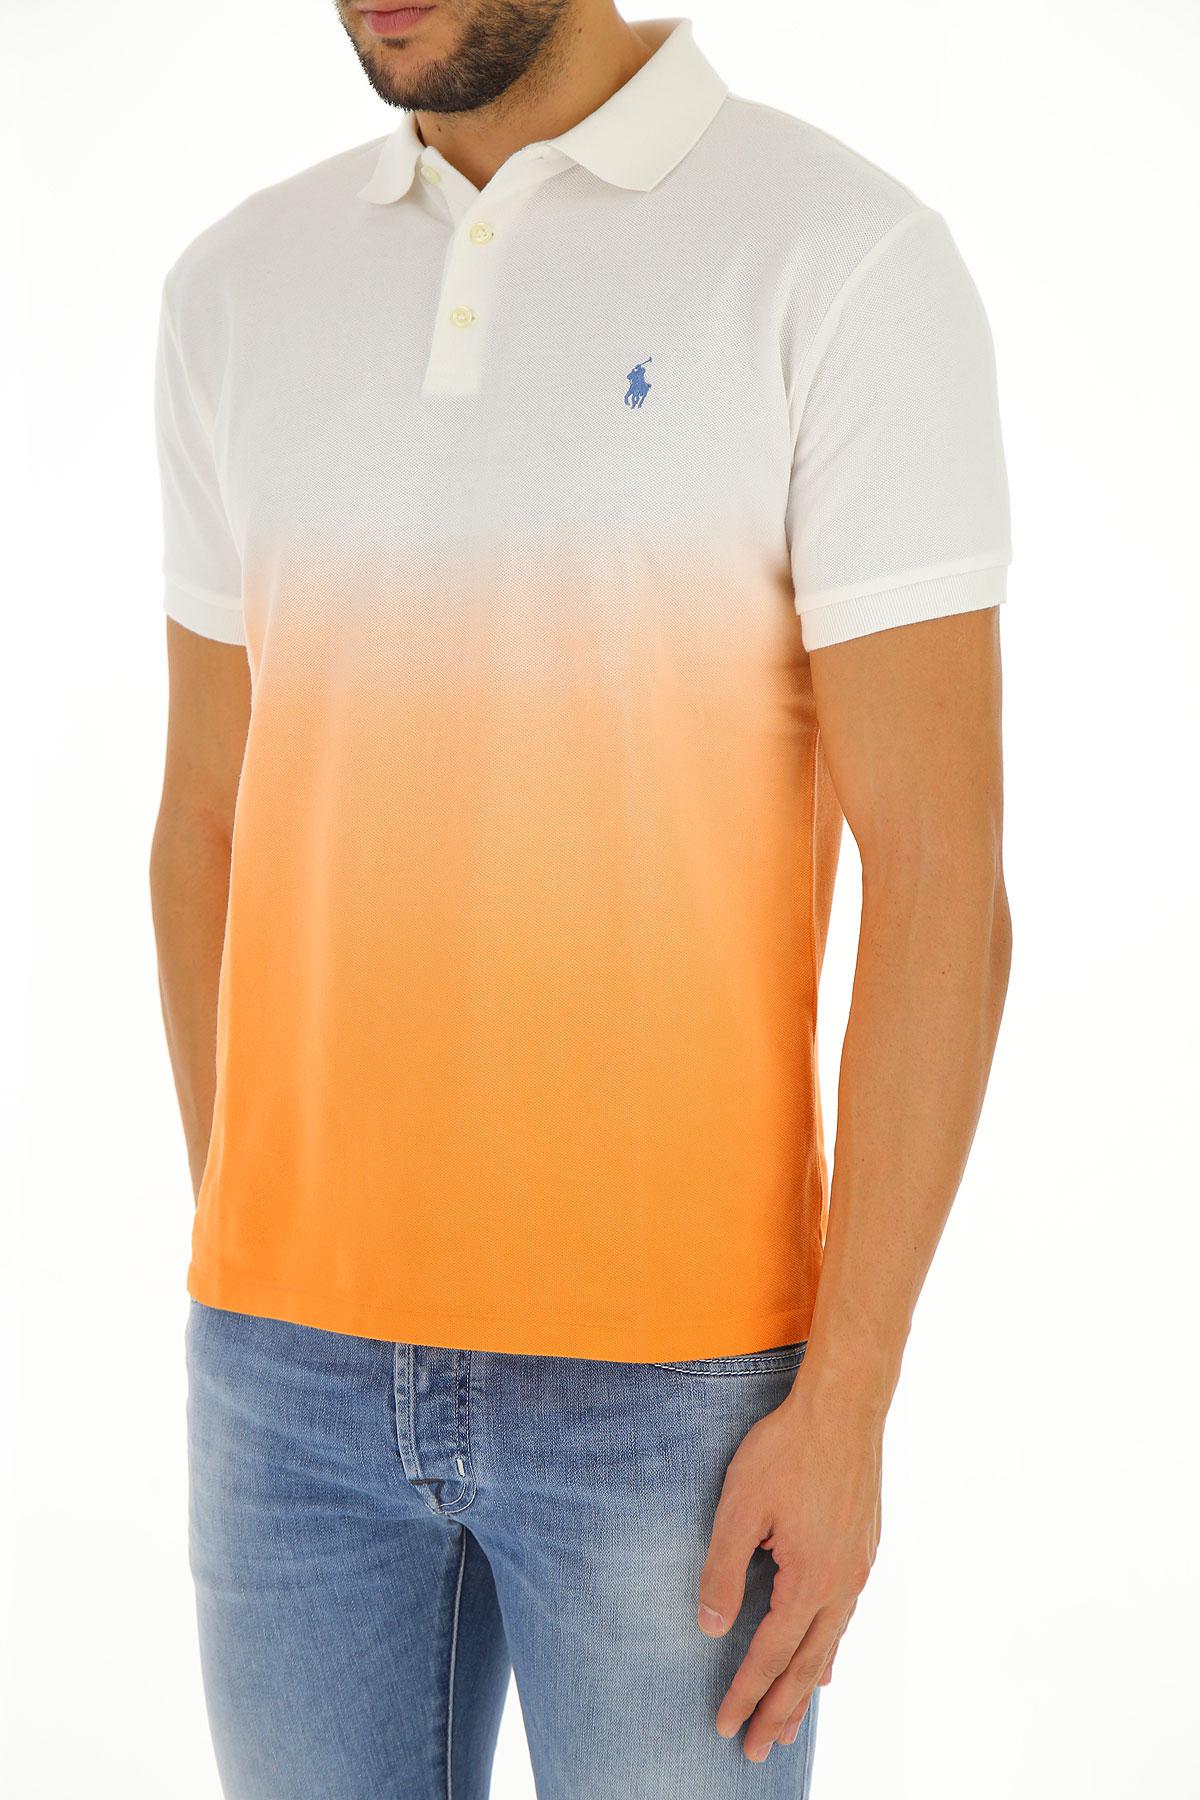 Ralph Lauren White Polo Shirt For Men On Sale In Outlet 